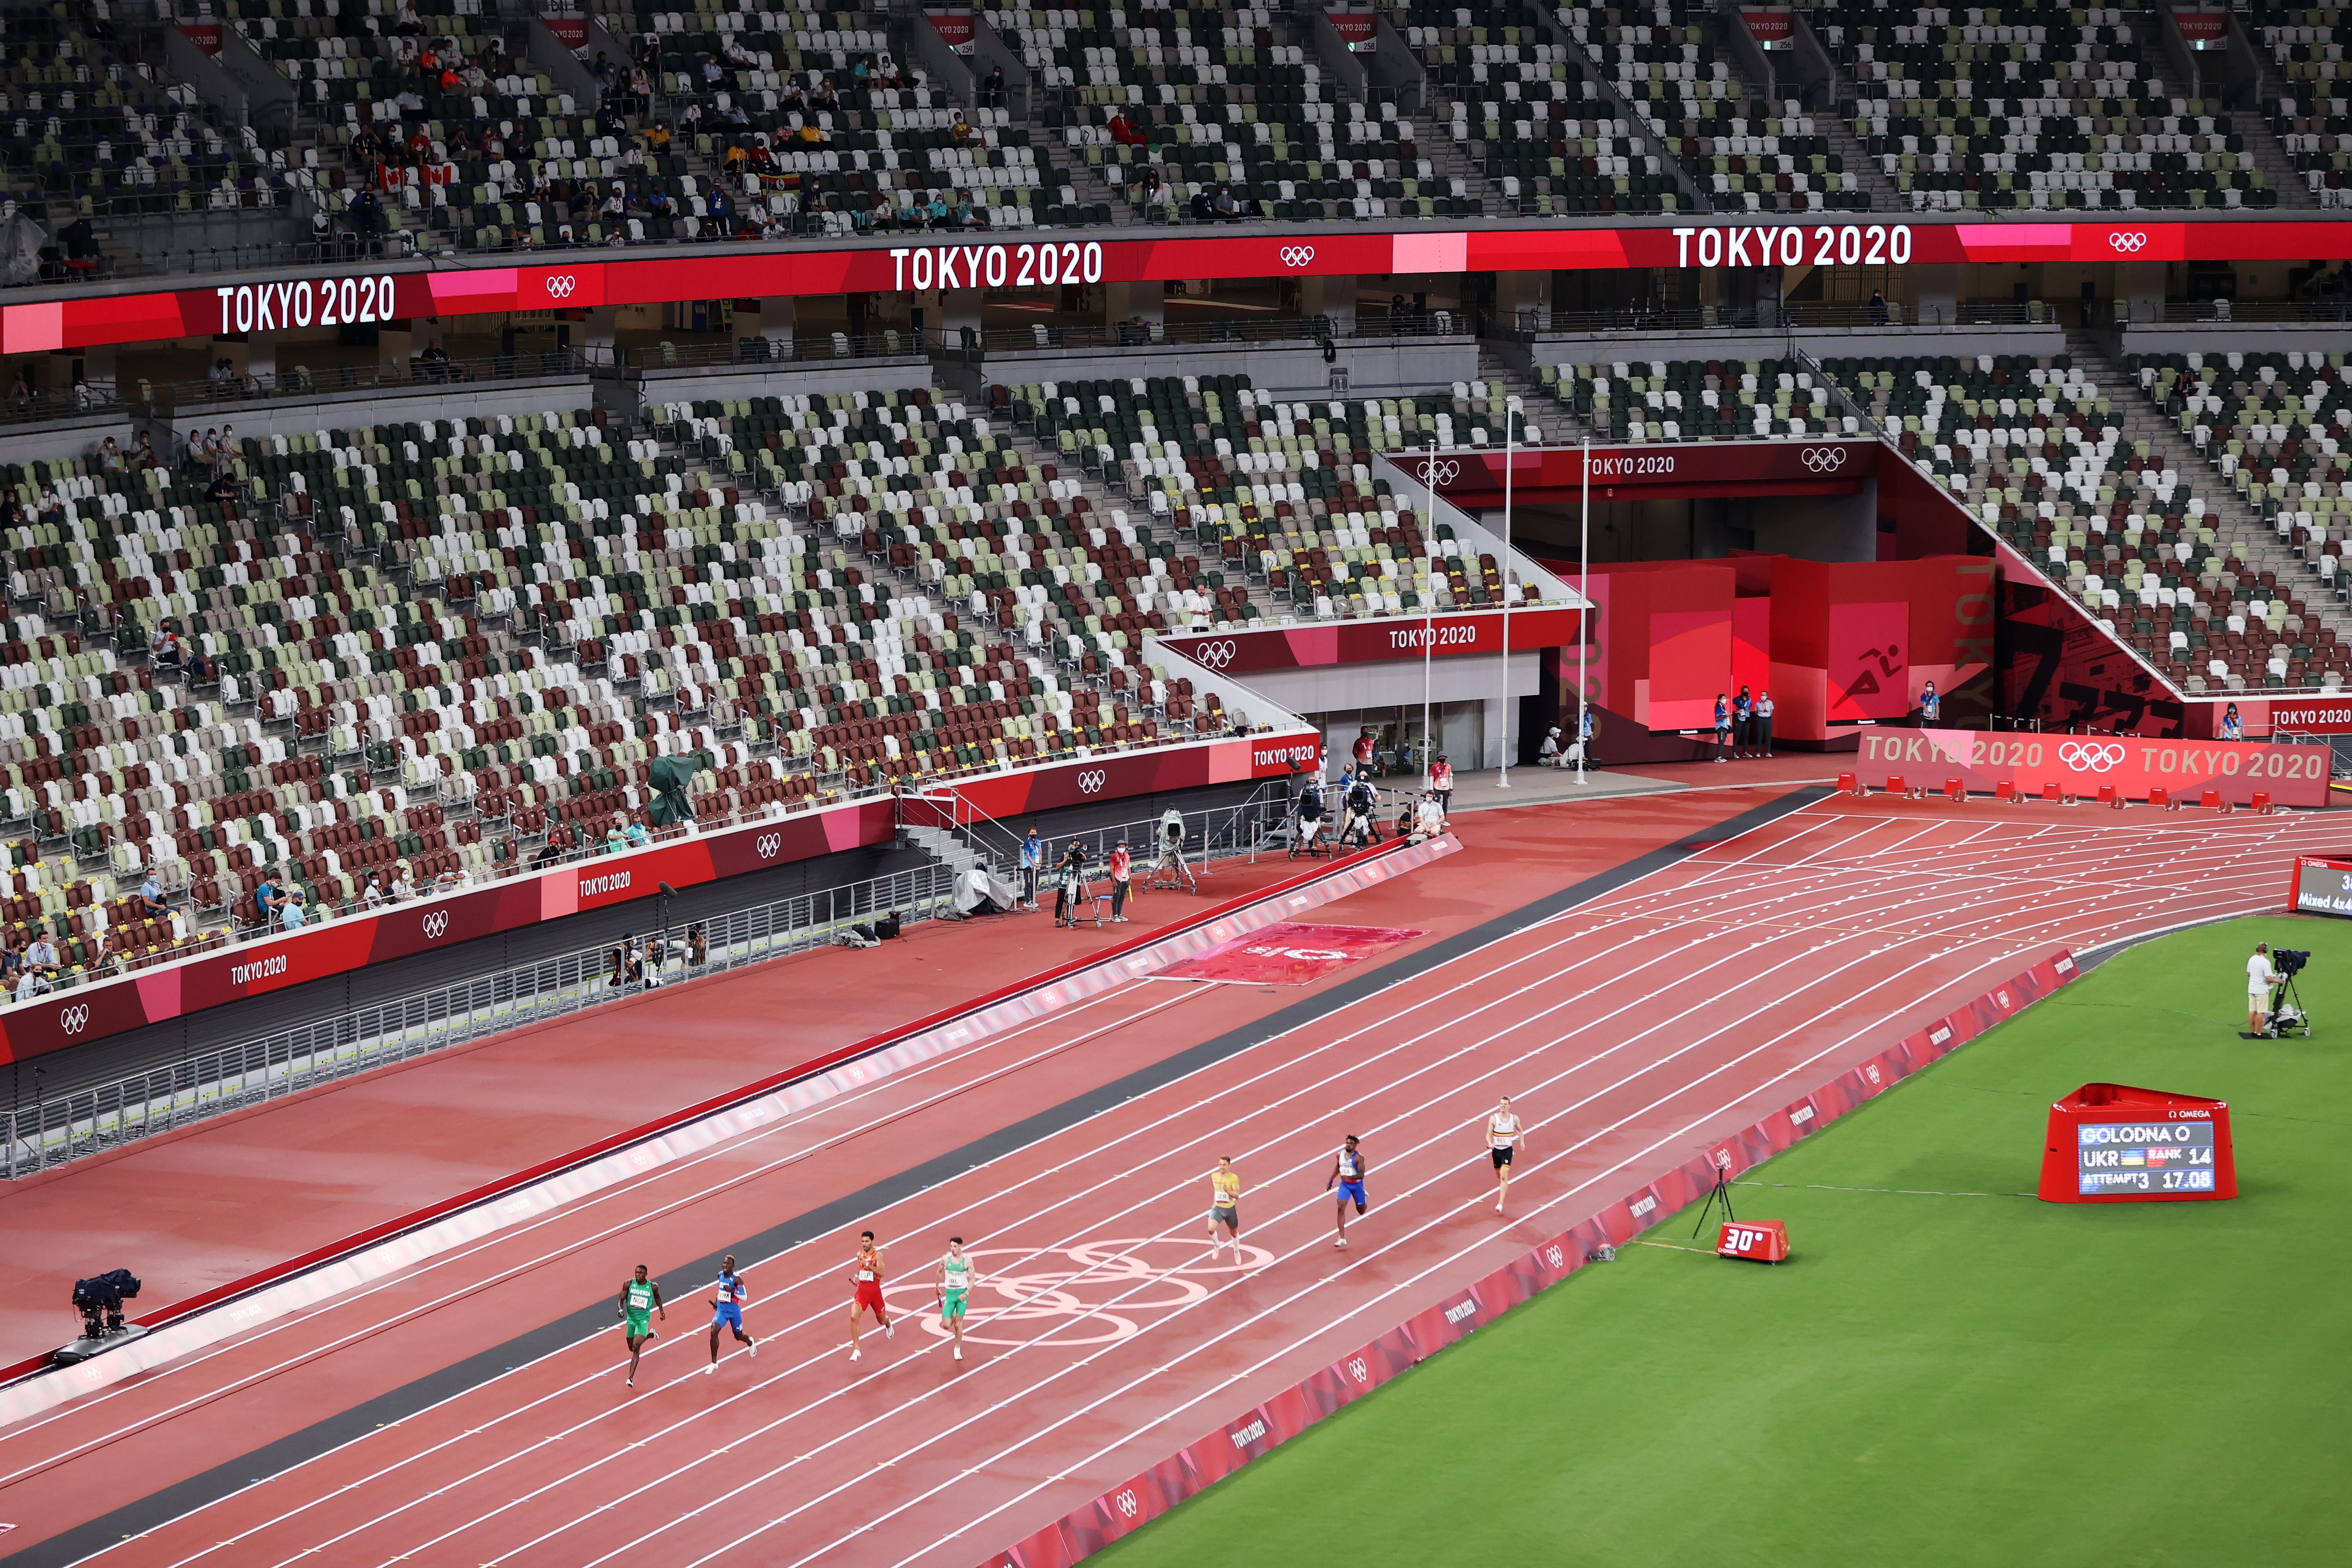 Tokyo hosted a successful Olympic Games in 2021